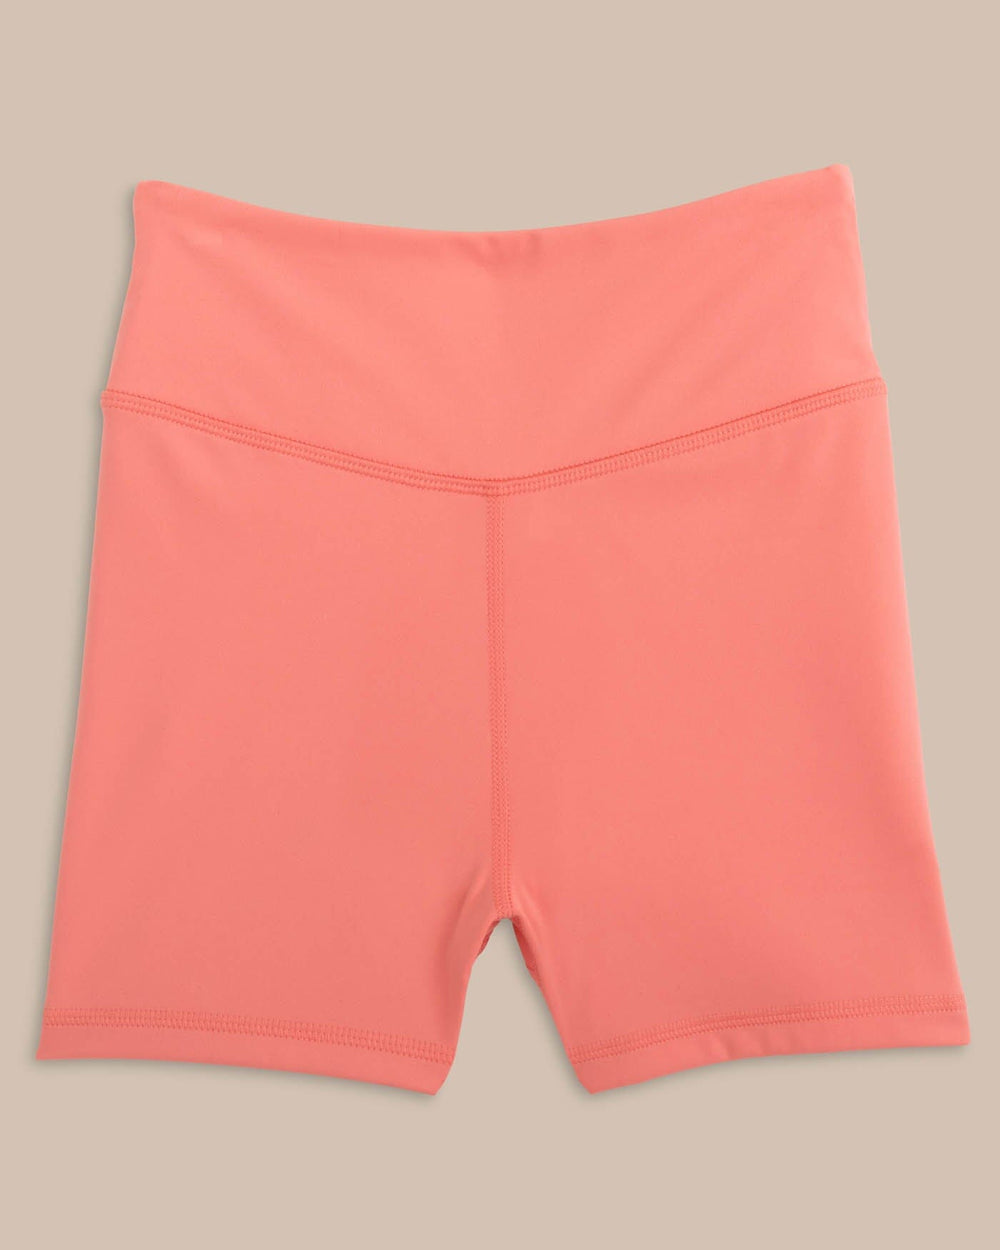 The front view of the Southern Tide Active Under Short by Southern Tide - Conch Shell